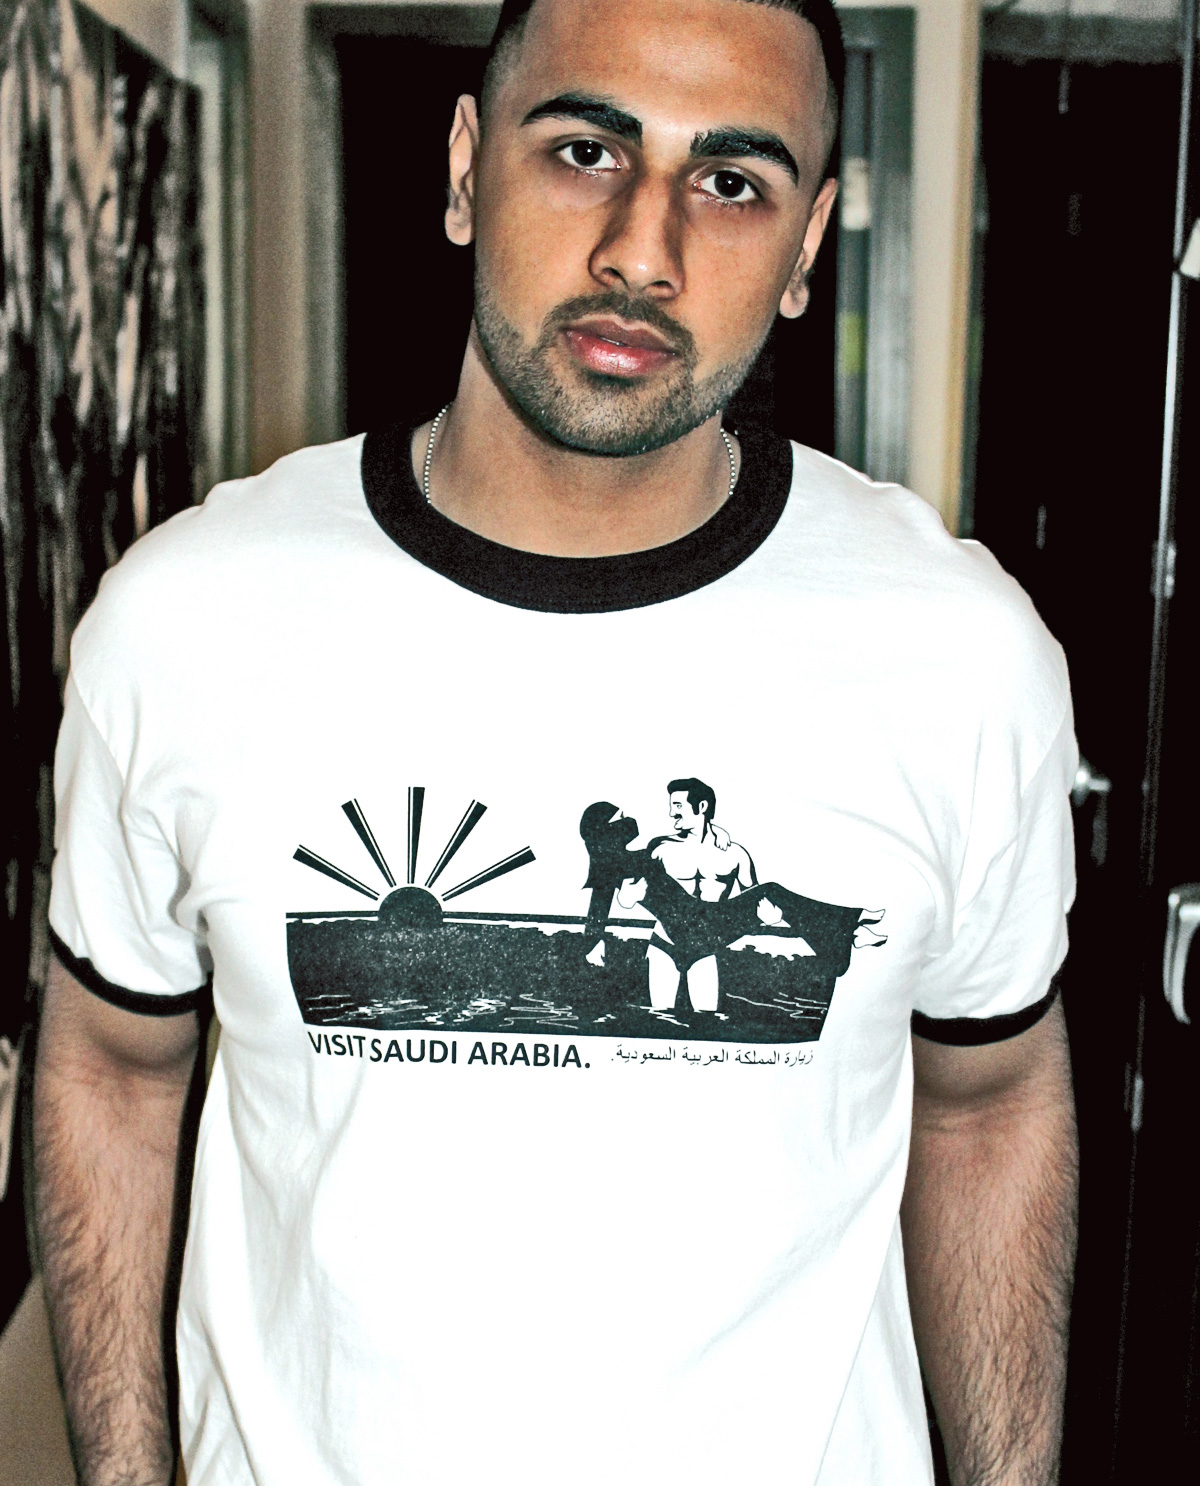 Visit Saudi Arabia Graphic Design T.shirt printed on white and black ringer t.shirt by Brown Man Clothing Co.